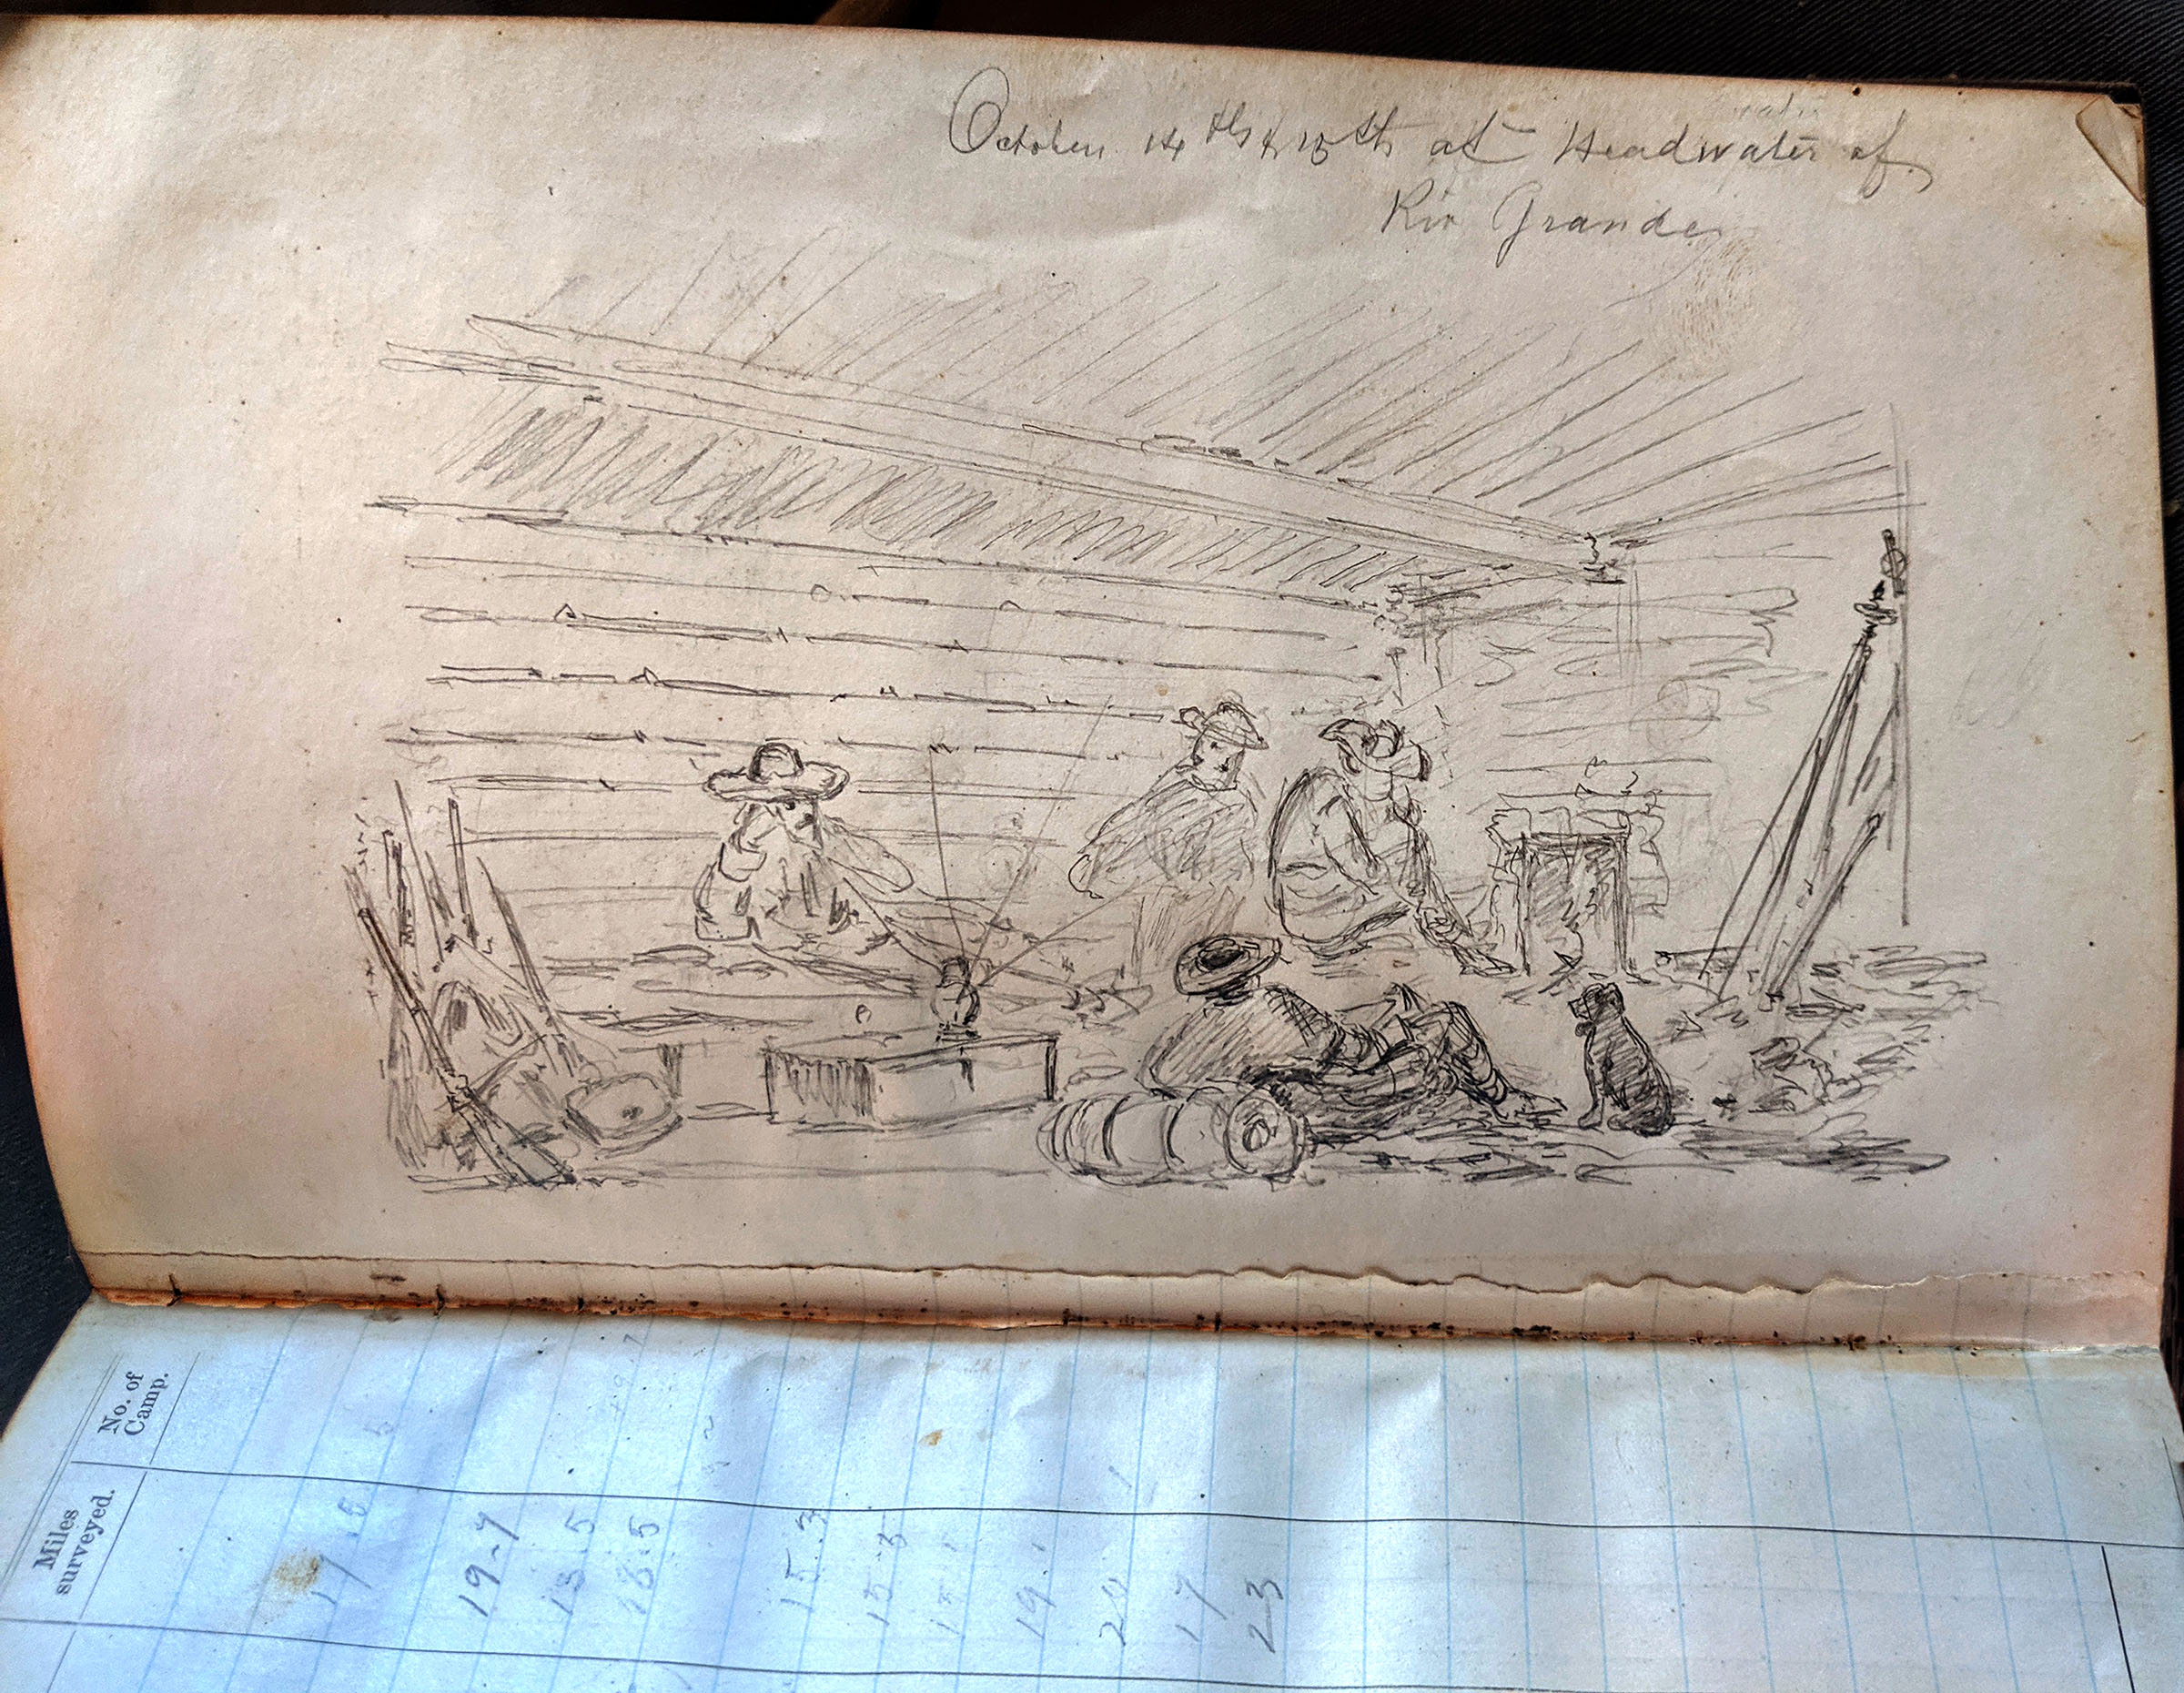 Sketch of men at a campfire with a dog